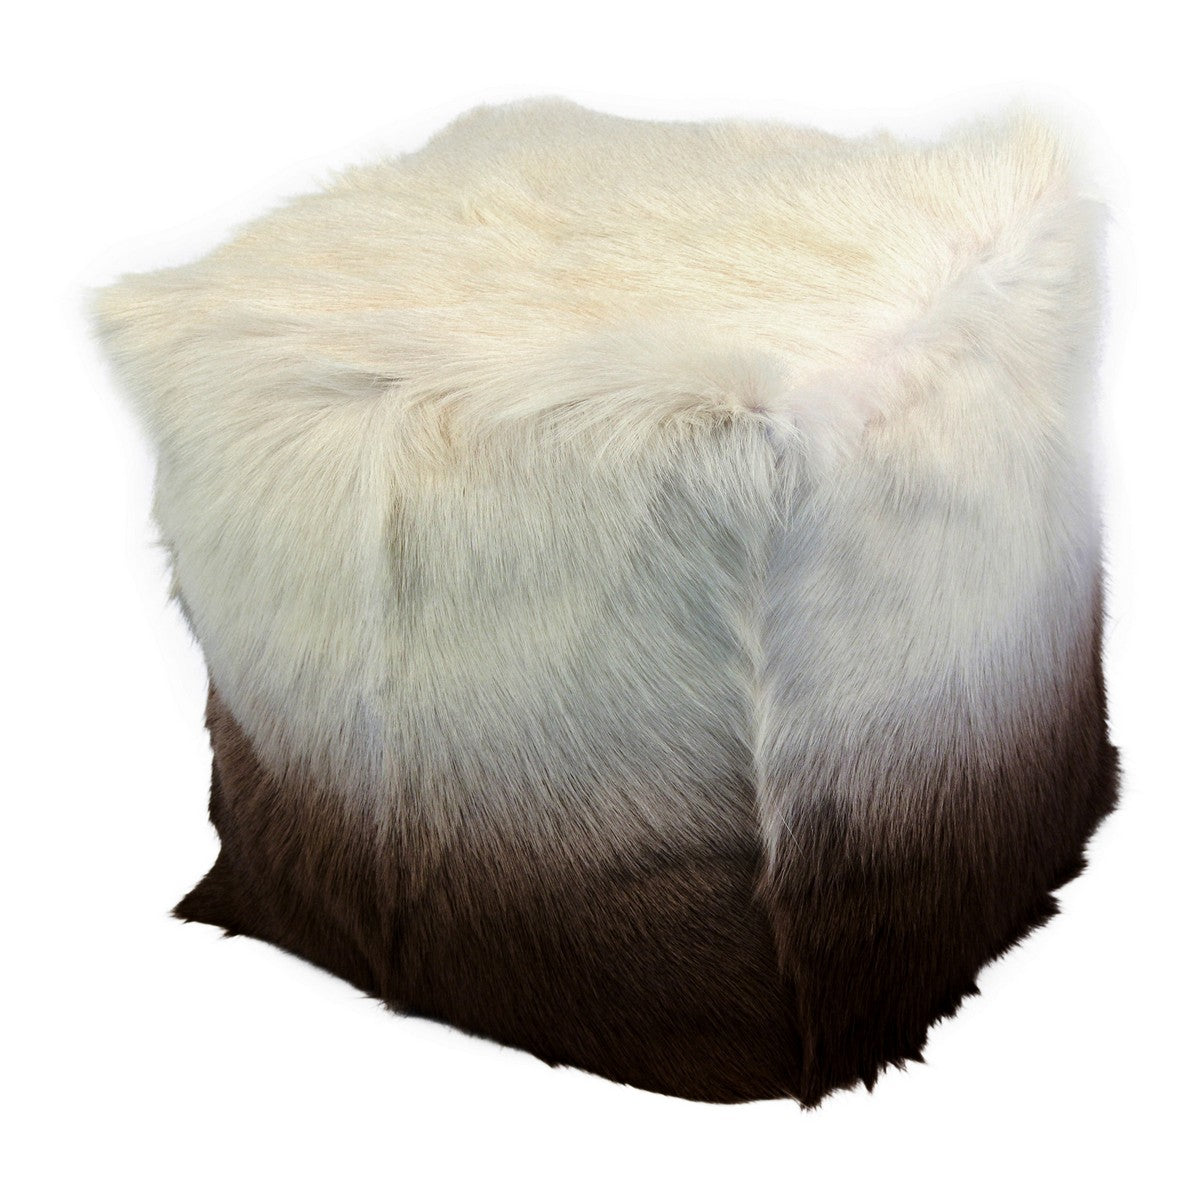 Moe's Home Collection Goat Fur Pouf Cappuccino Ombre - XU-1010-14